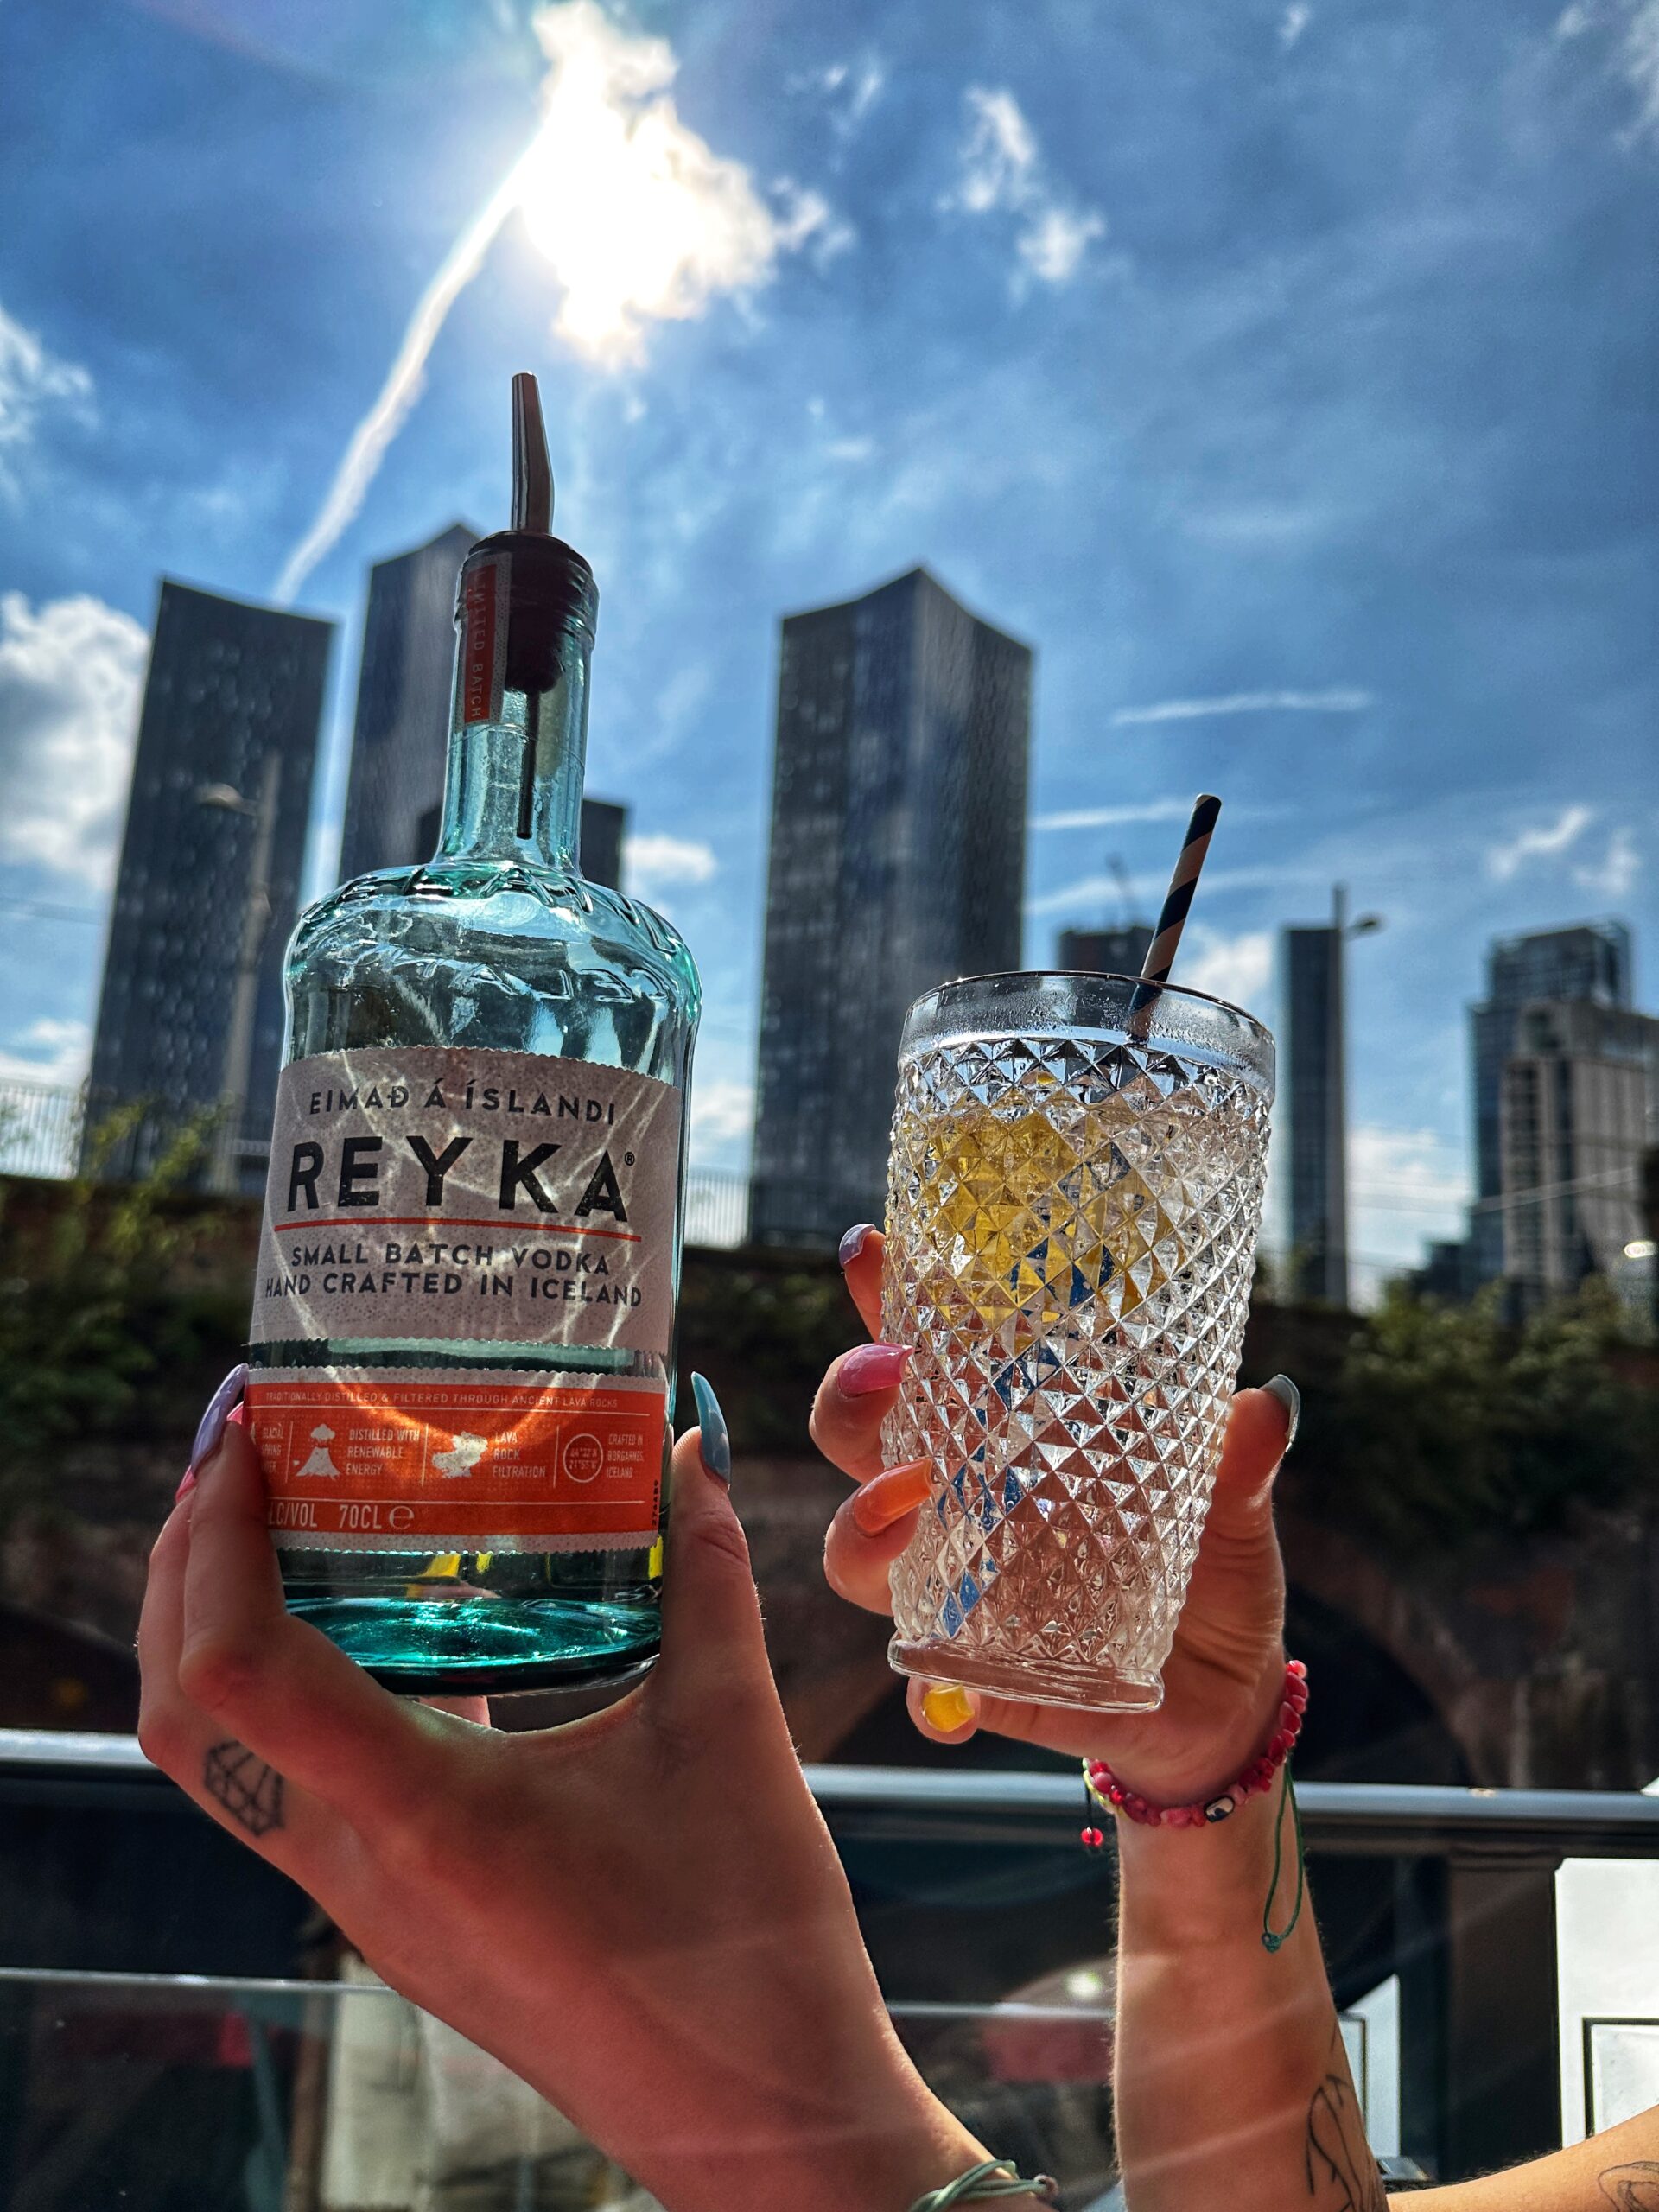 Where to find Reyka Vodka in Manchester - The Deansgate